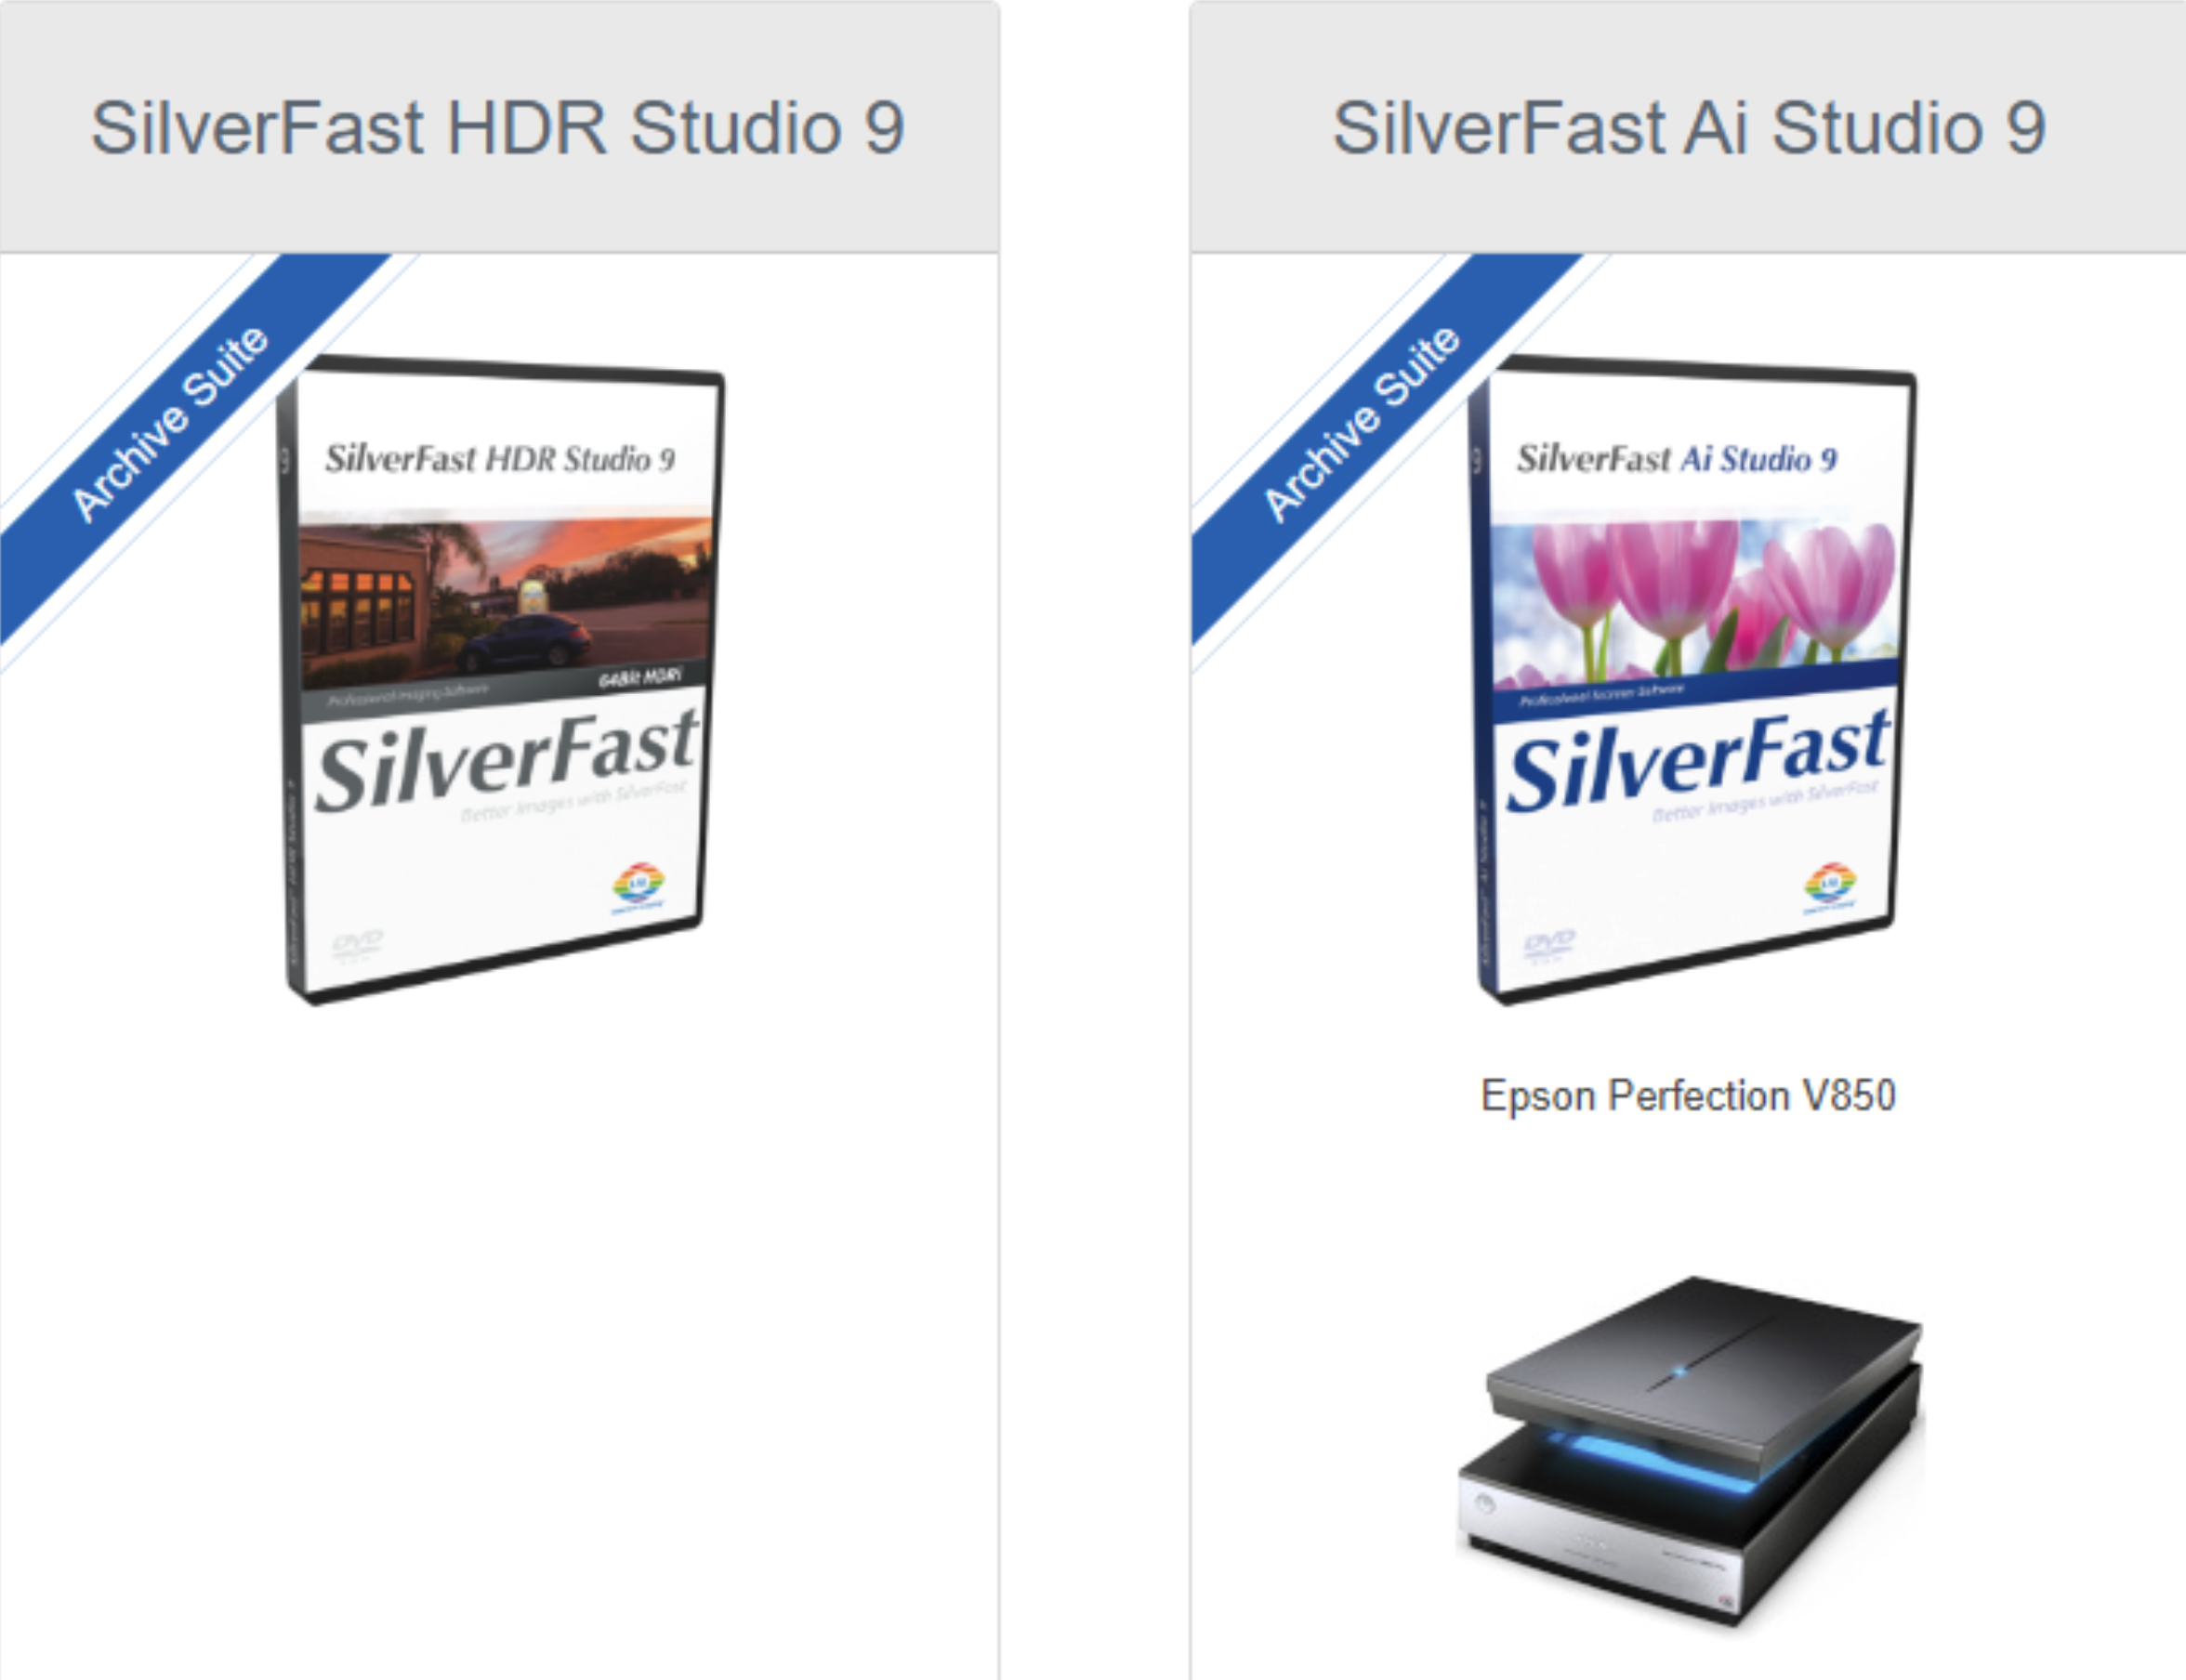 SilverFast-HDR-Studio-9-archive-suite-SilverFast-A1-Studio-9